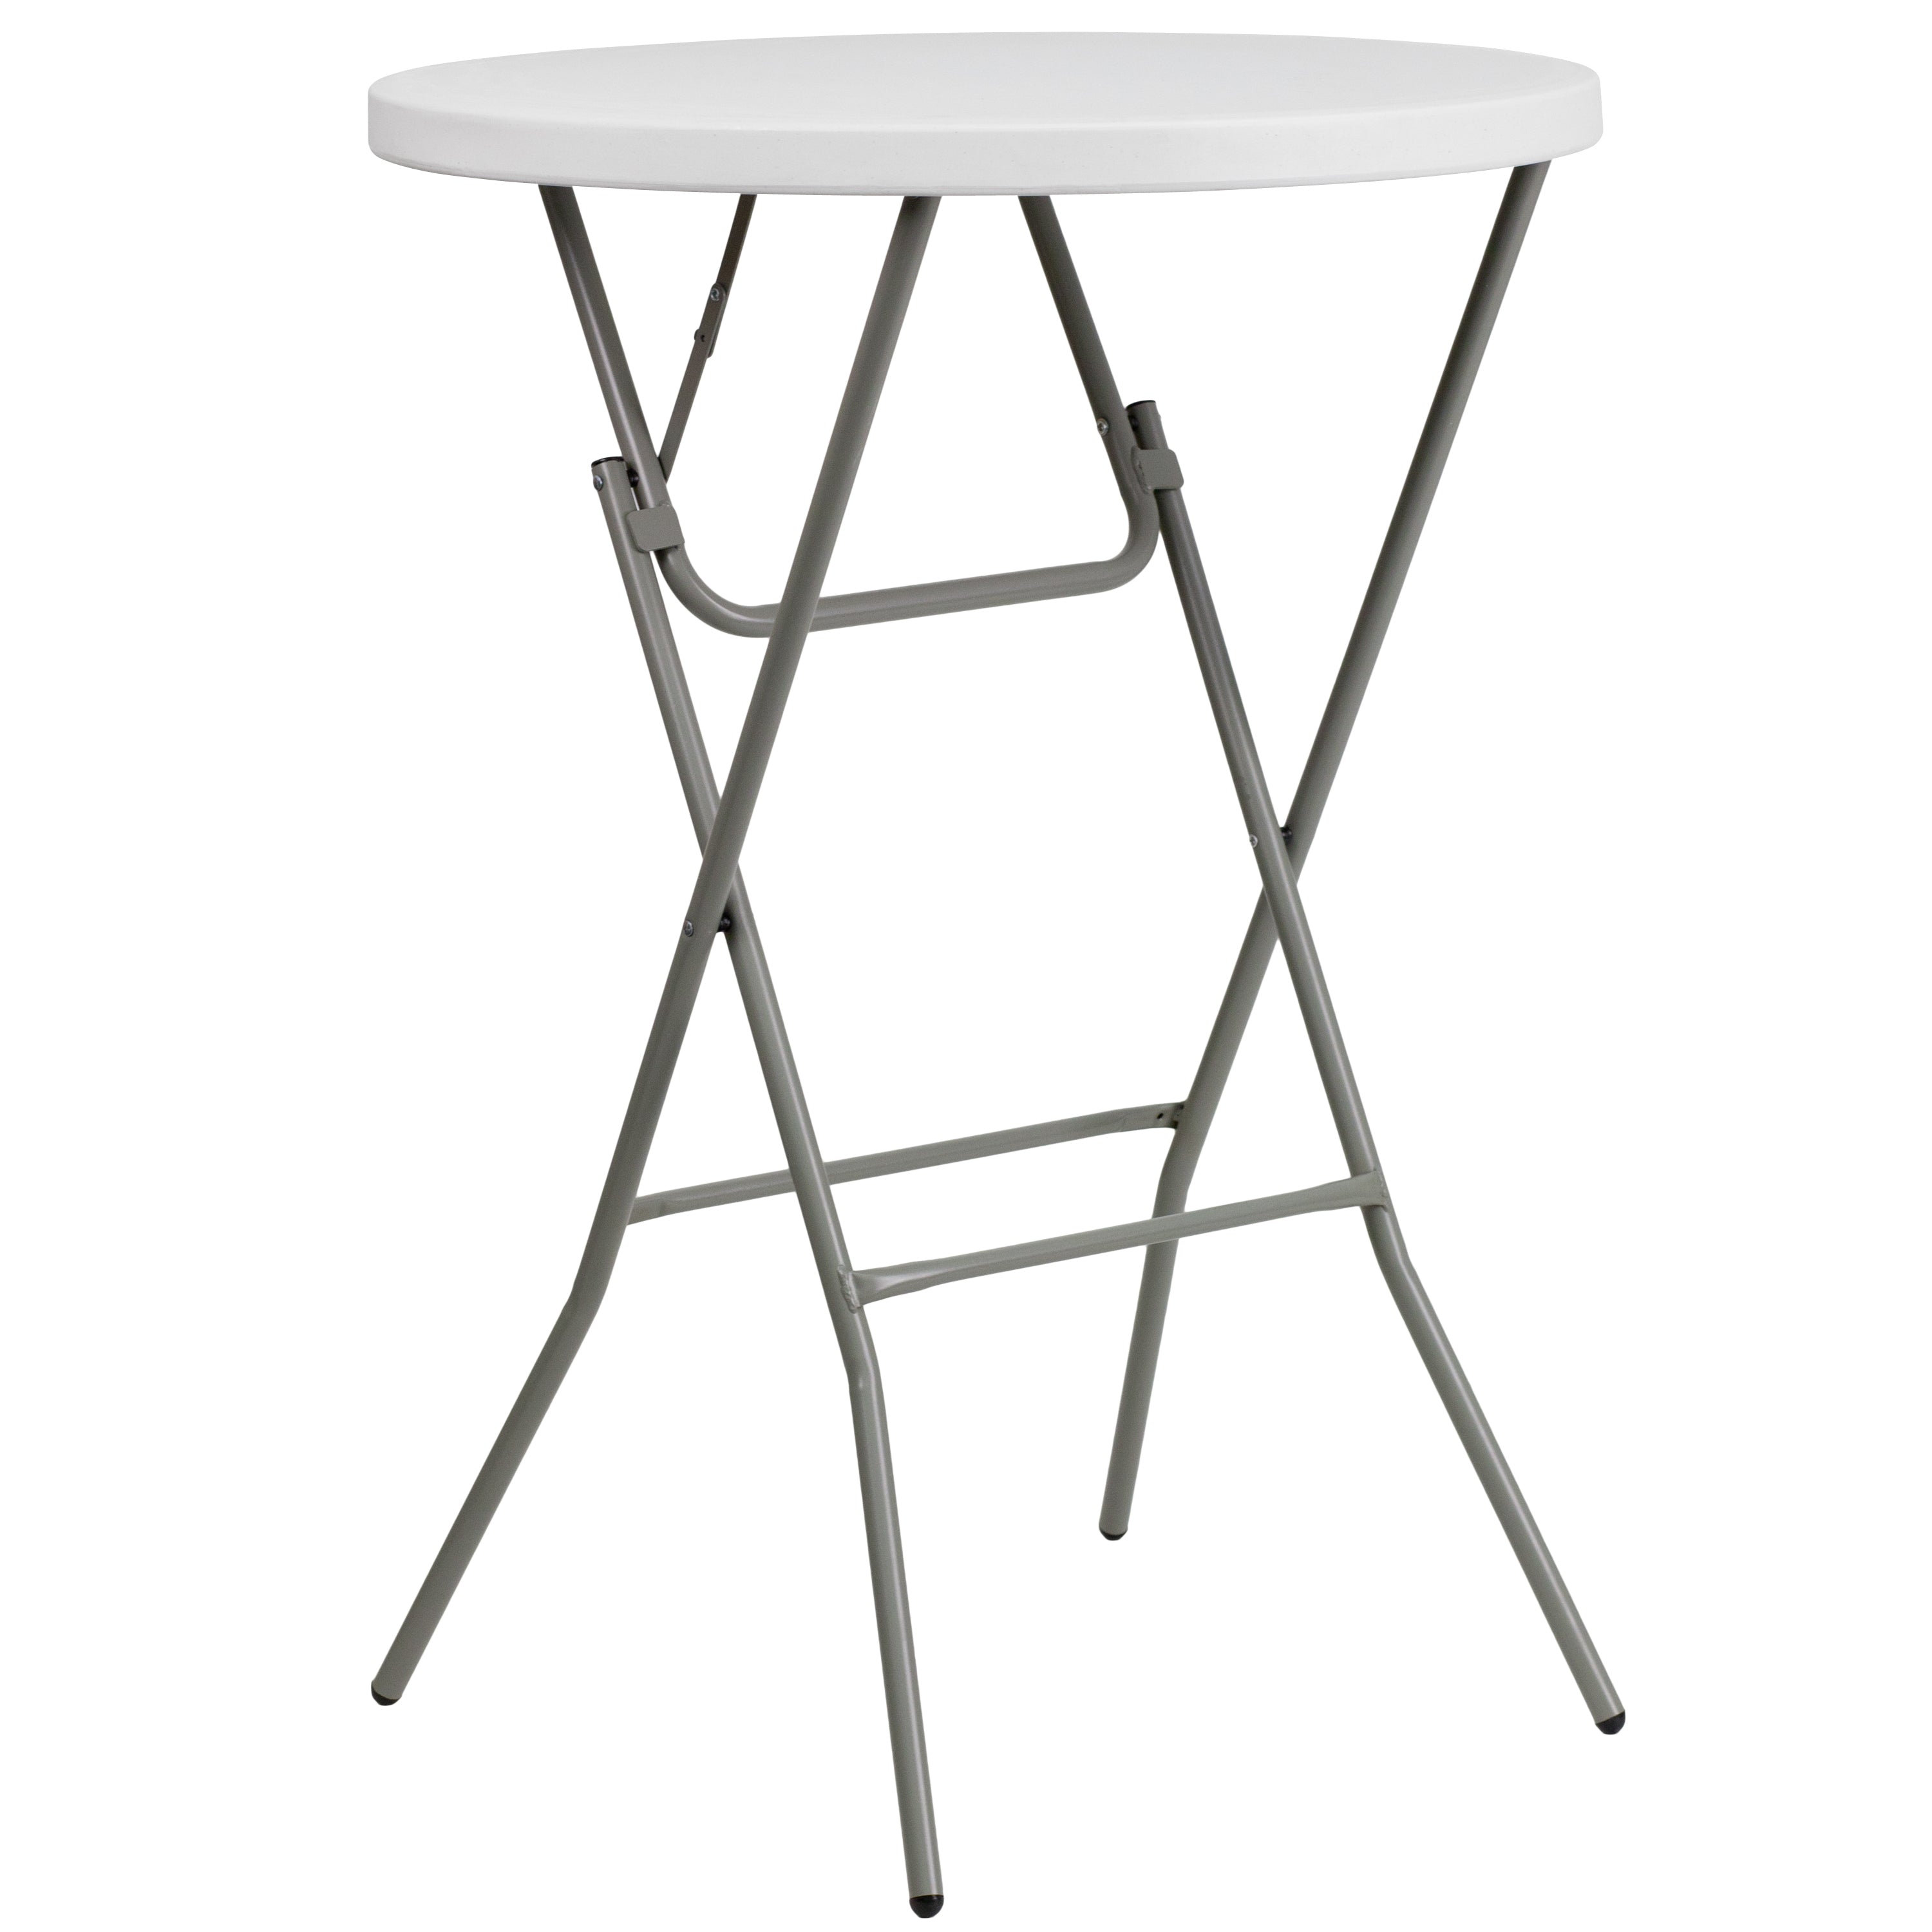 2.6-Foot Round Plastic Bar Height Folding Table-Round Plastic Folding Table-Flash Furniture-Wall2Wall Furnishings